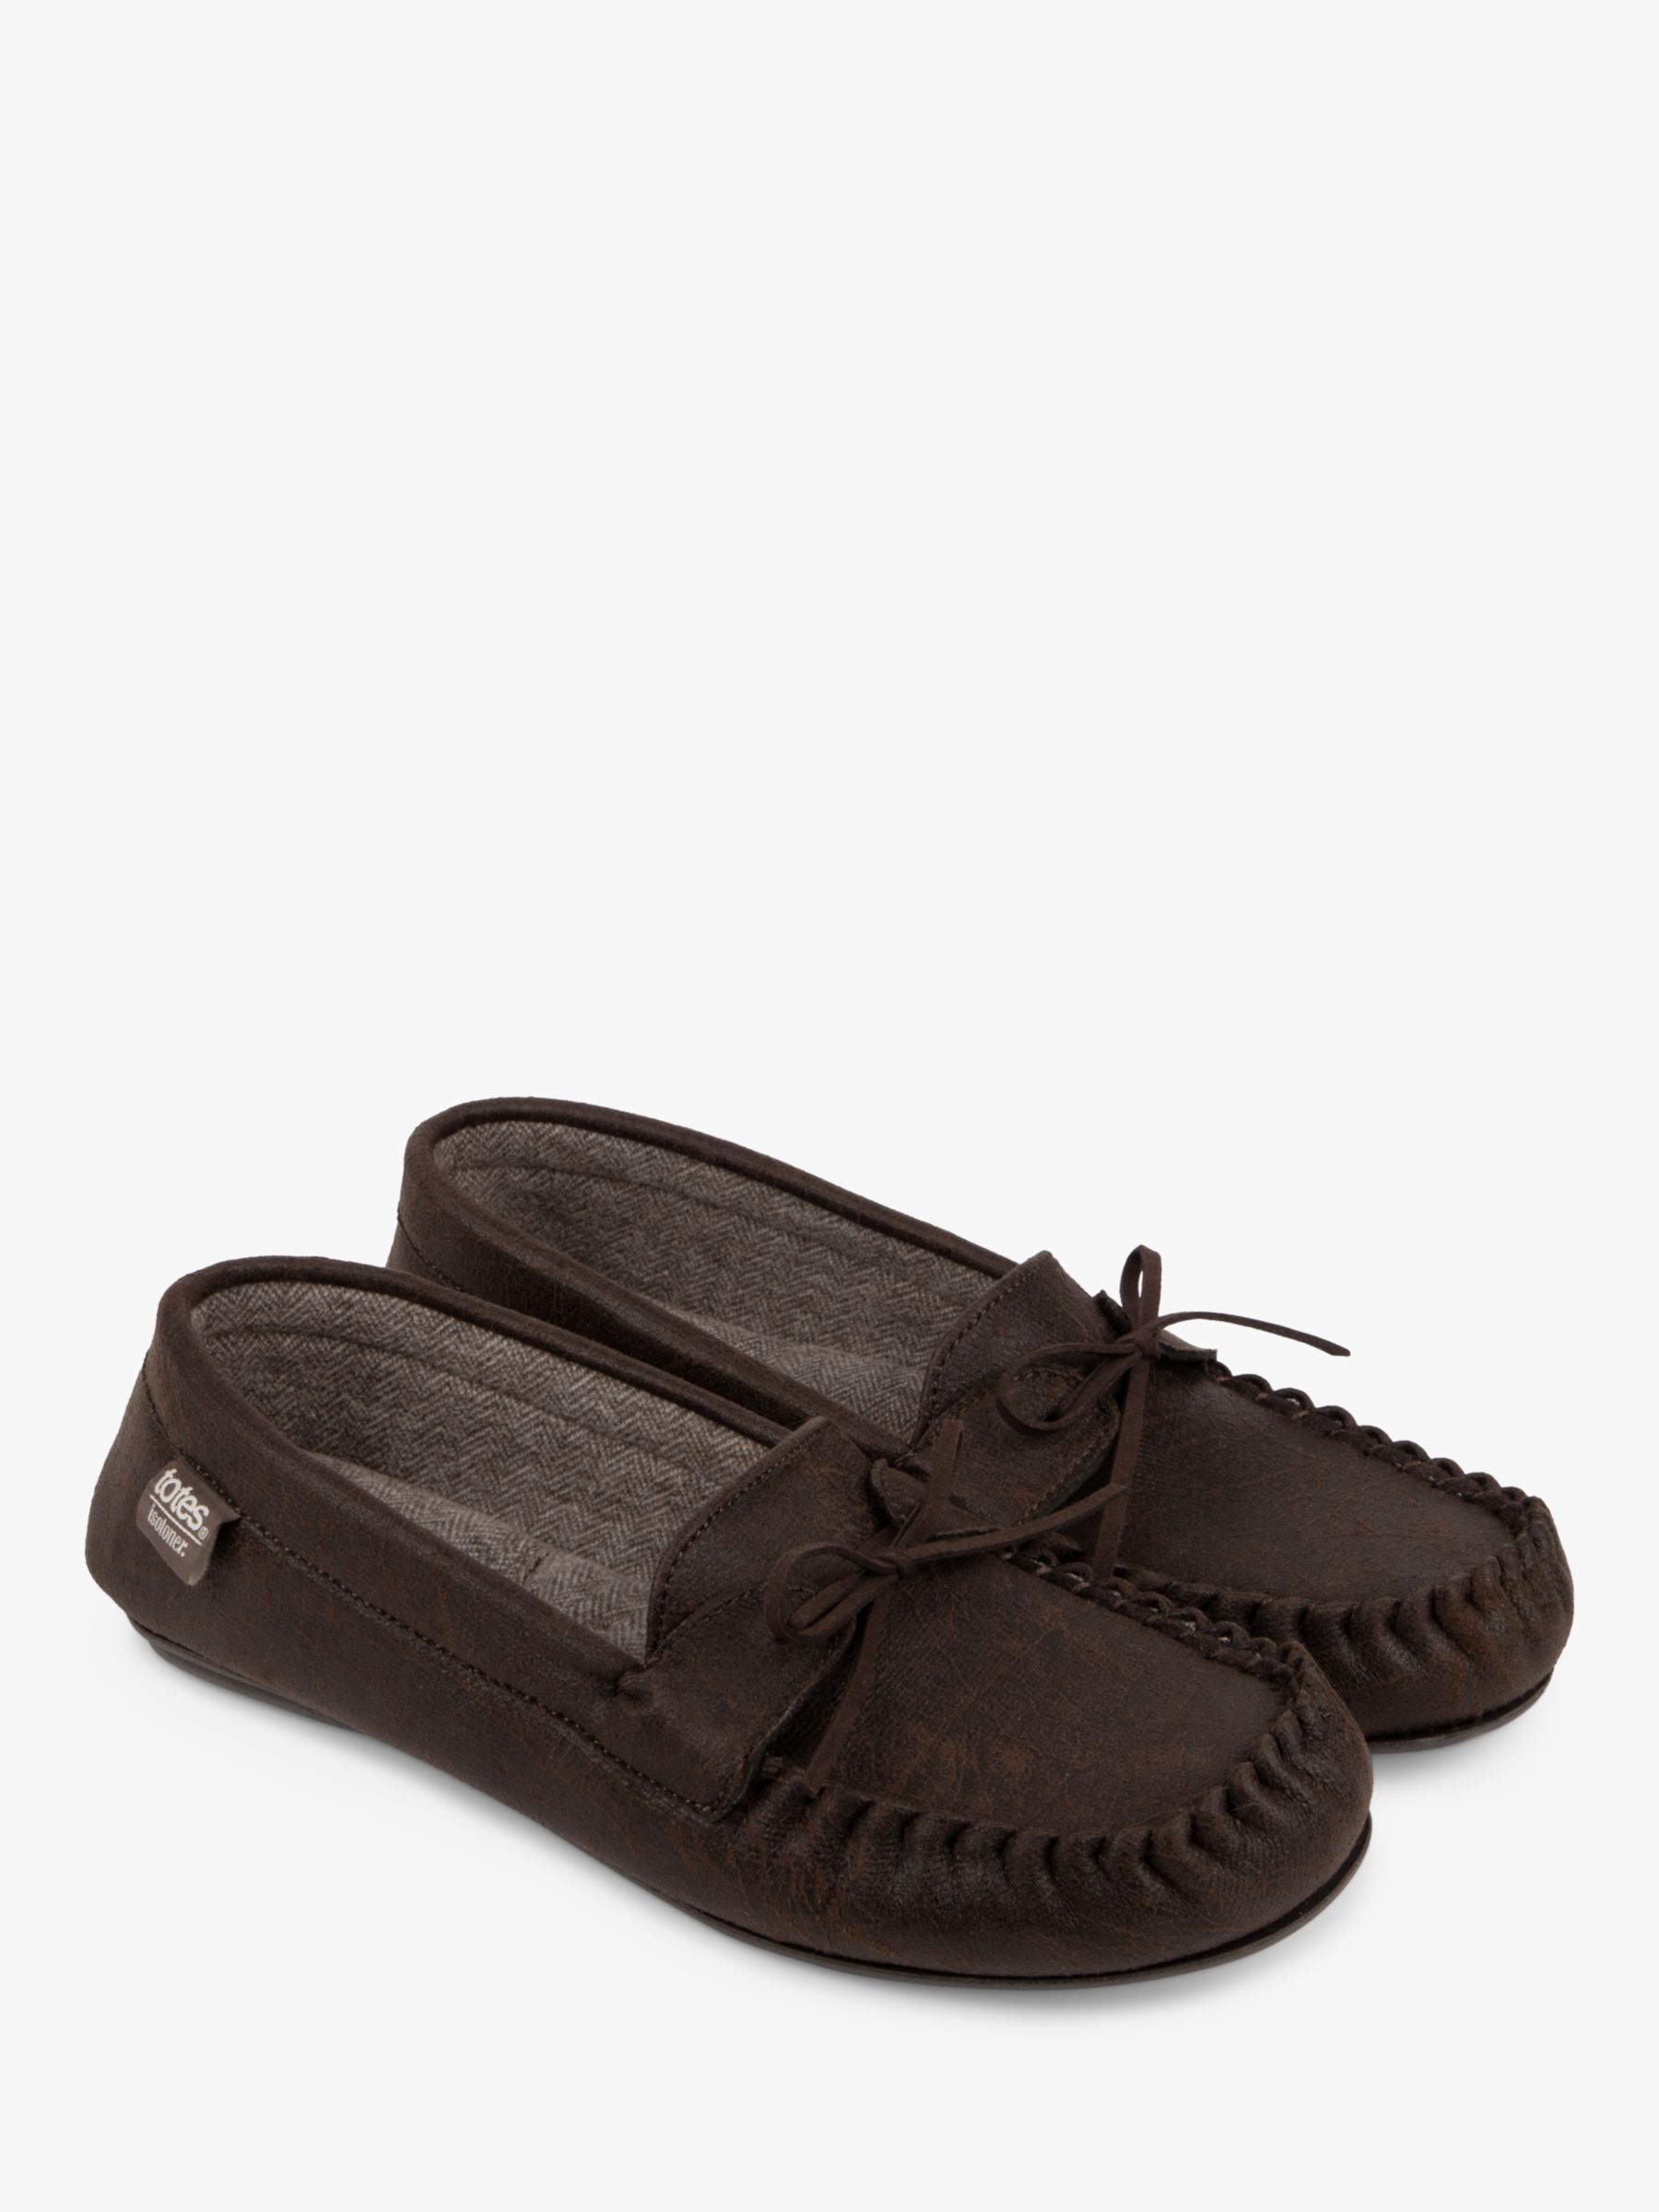 totes Distressed Moccasin Slippers, Brown, 8